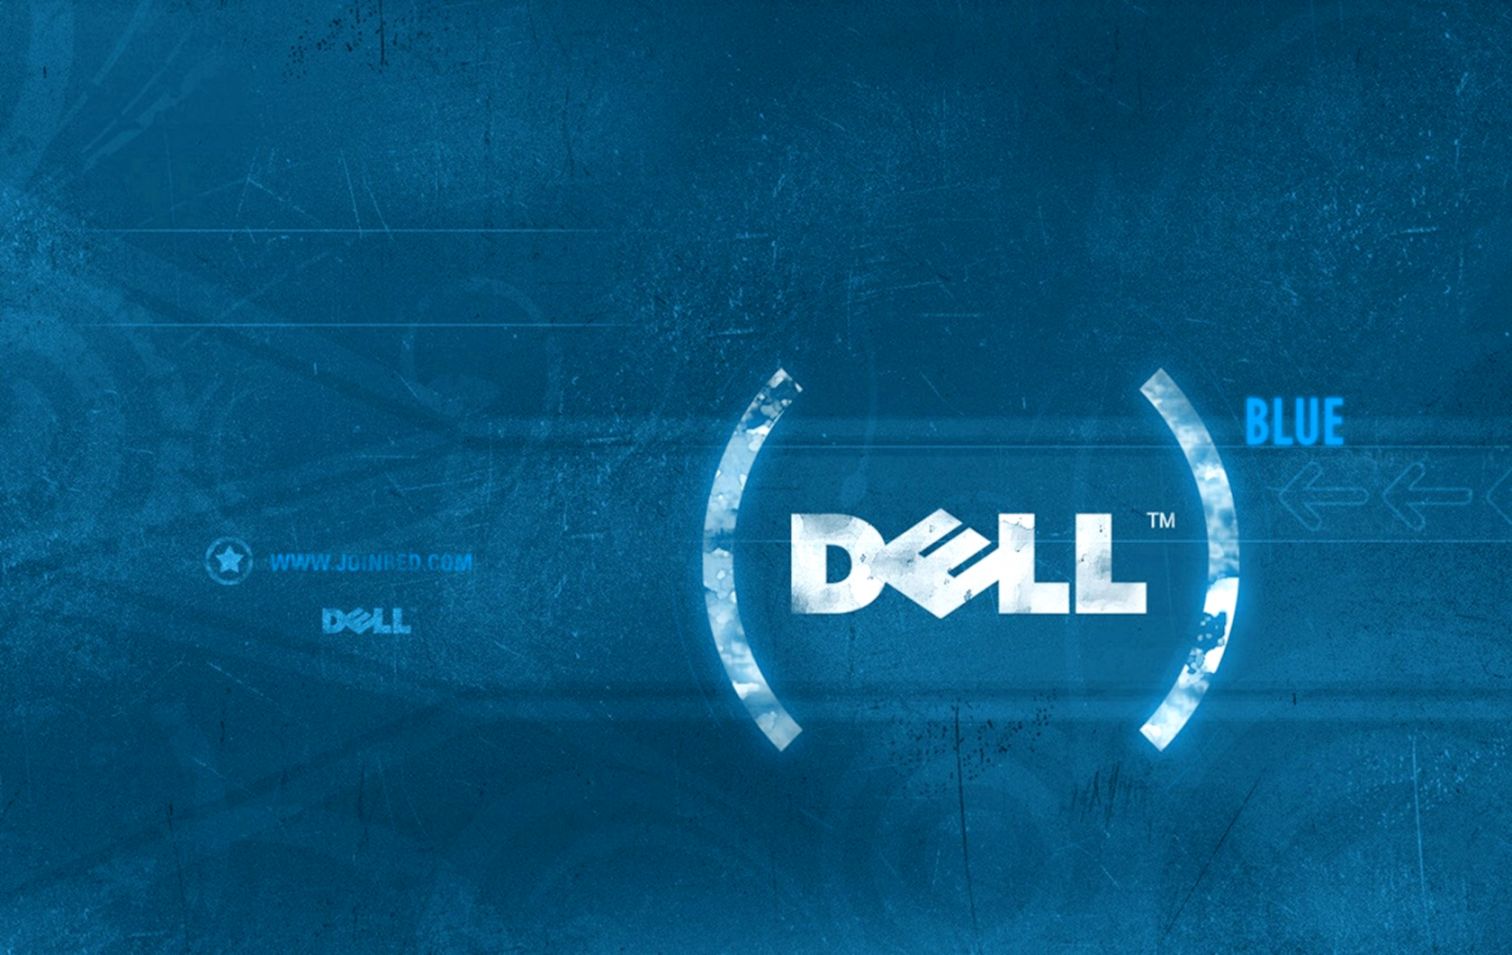 Hd Dell Backgrounds & Dell Wallpaper Images For Windows - Dell Technologies - HD Wallpaper 